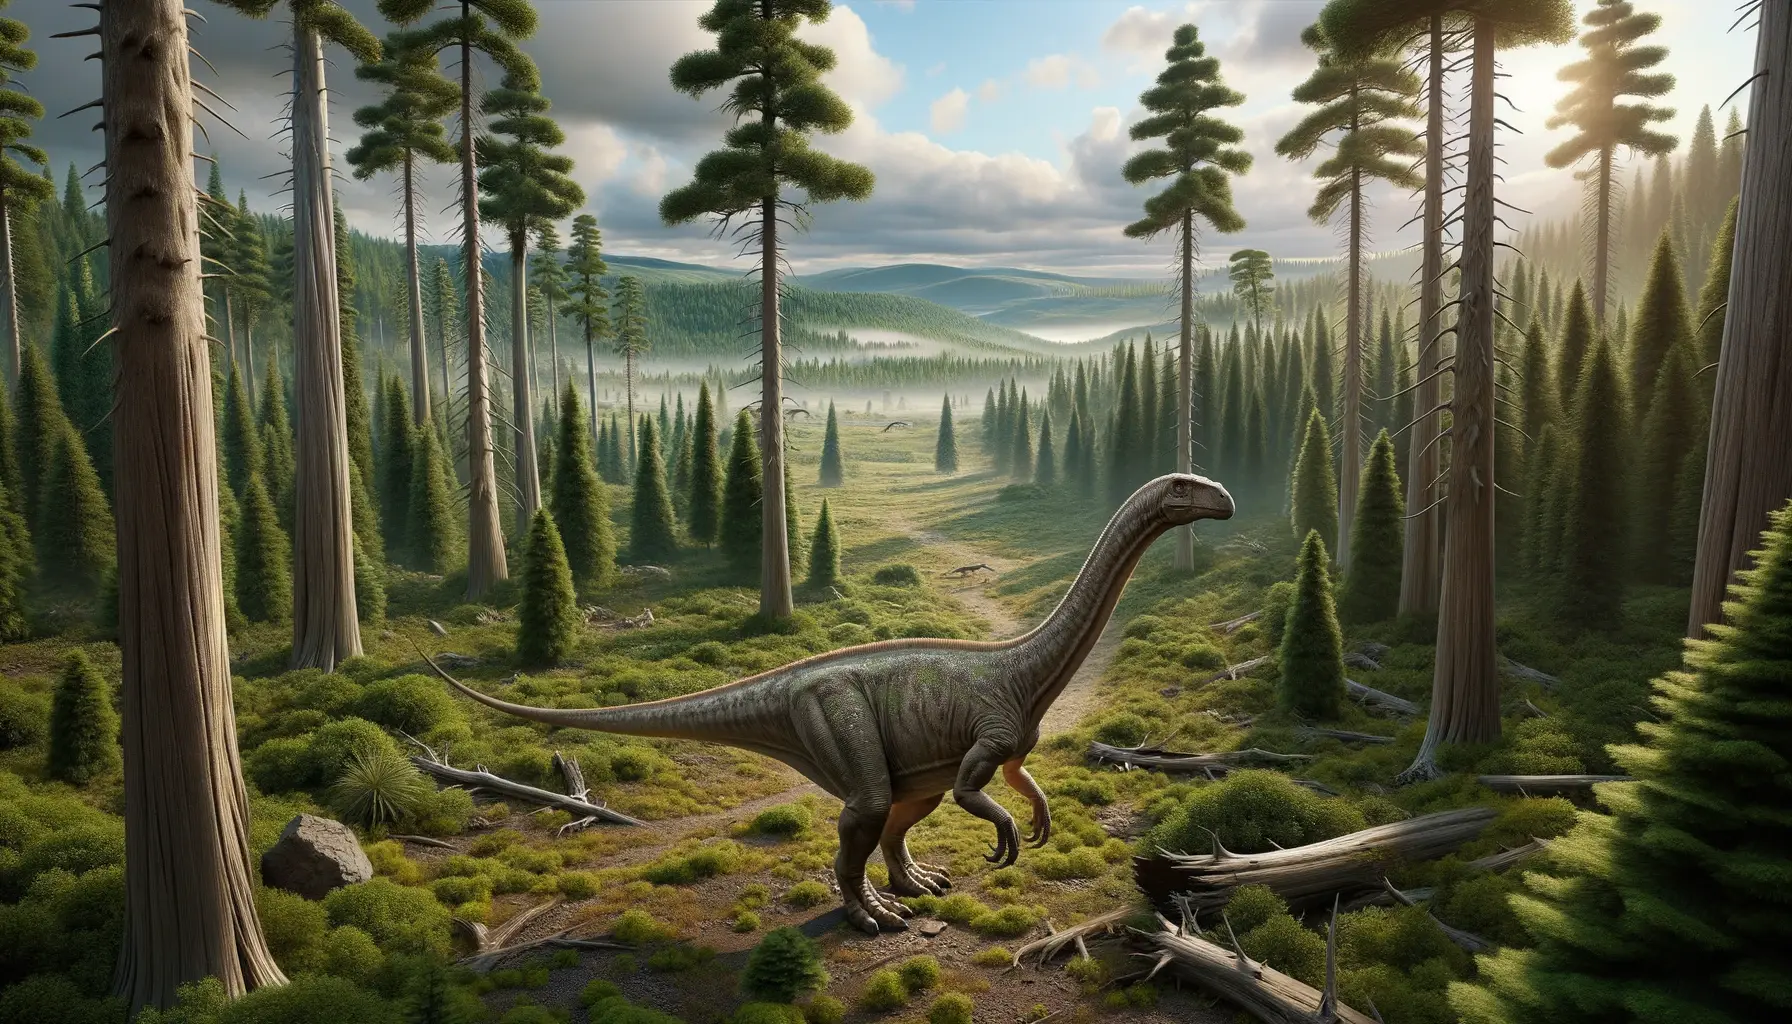 Anchisaurus in Late Triassic to Early Jurassic habitat.